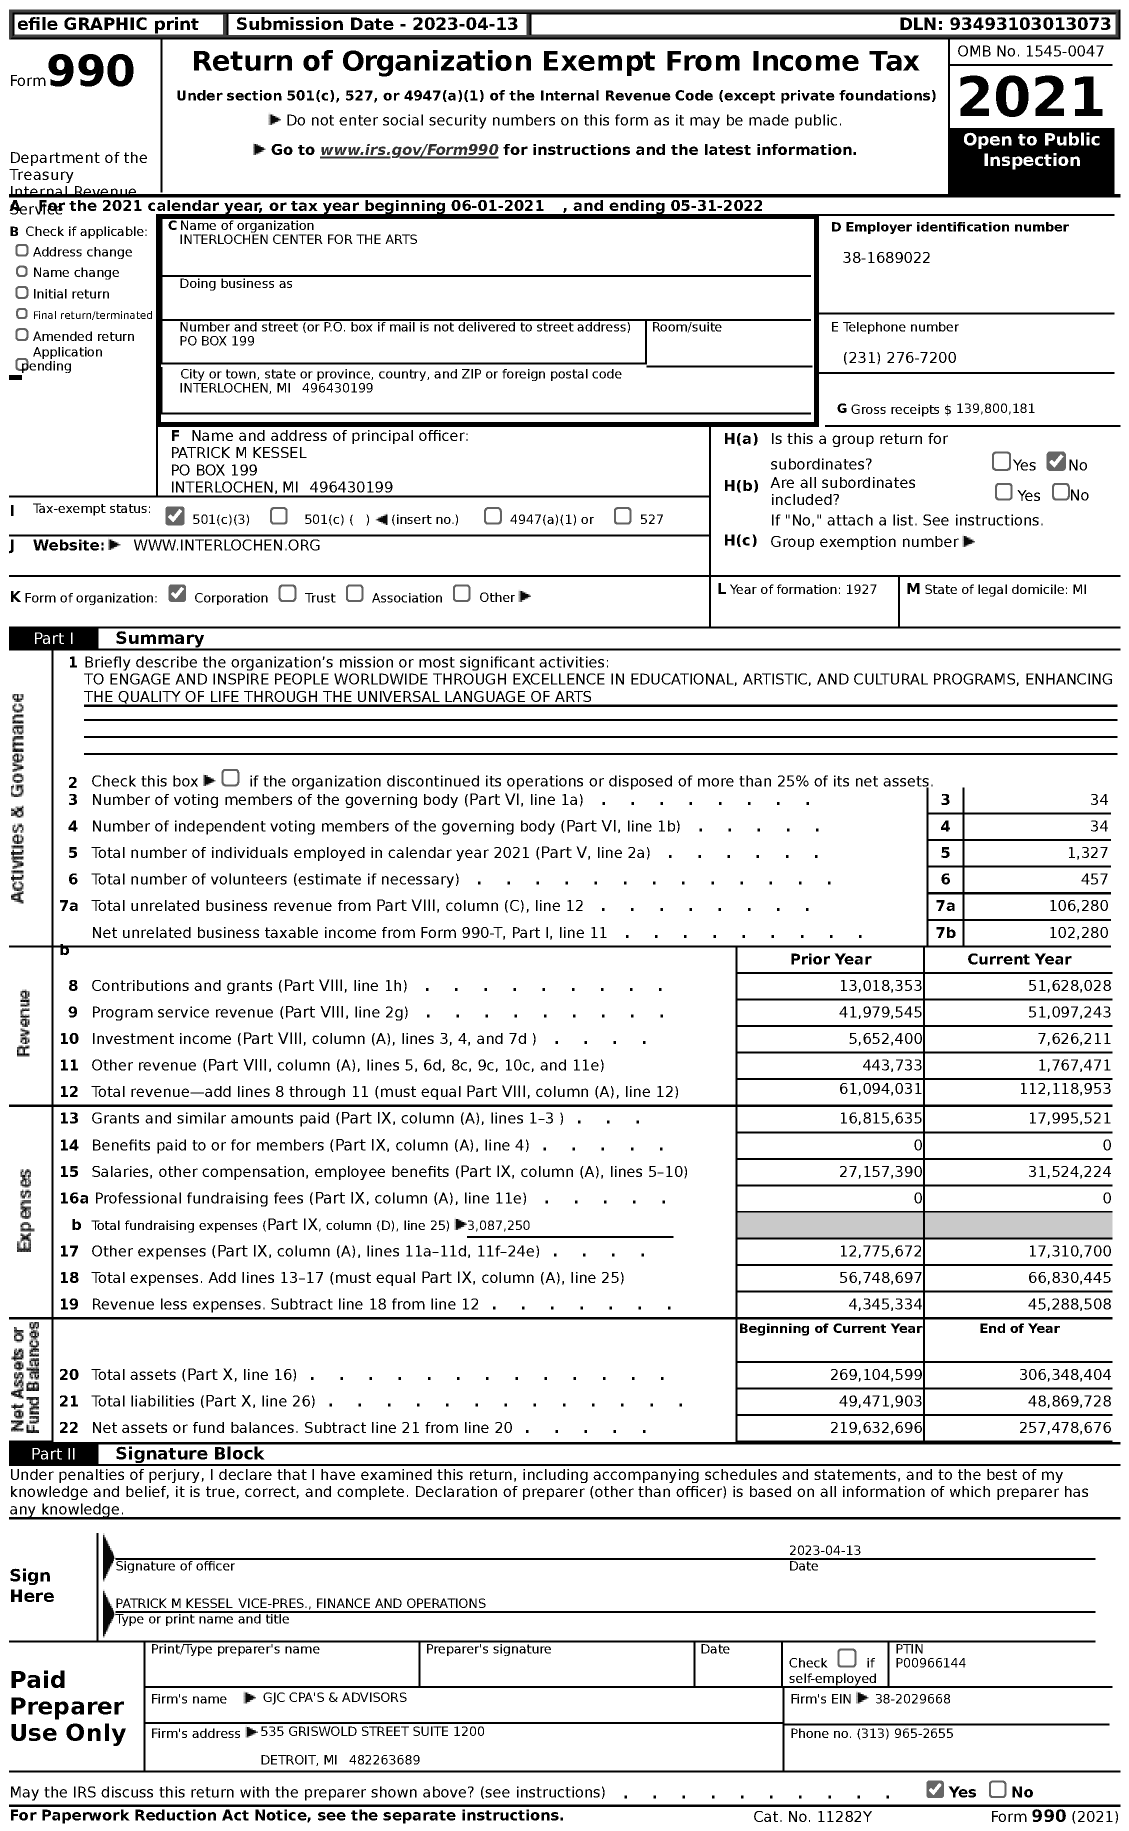 Image of first page of 2021 Form 990 for Interlochen Center for the Arts (ICA)